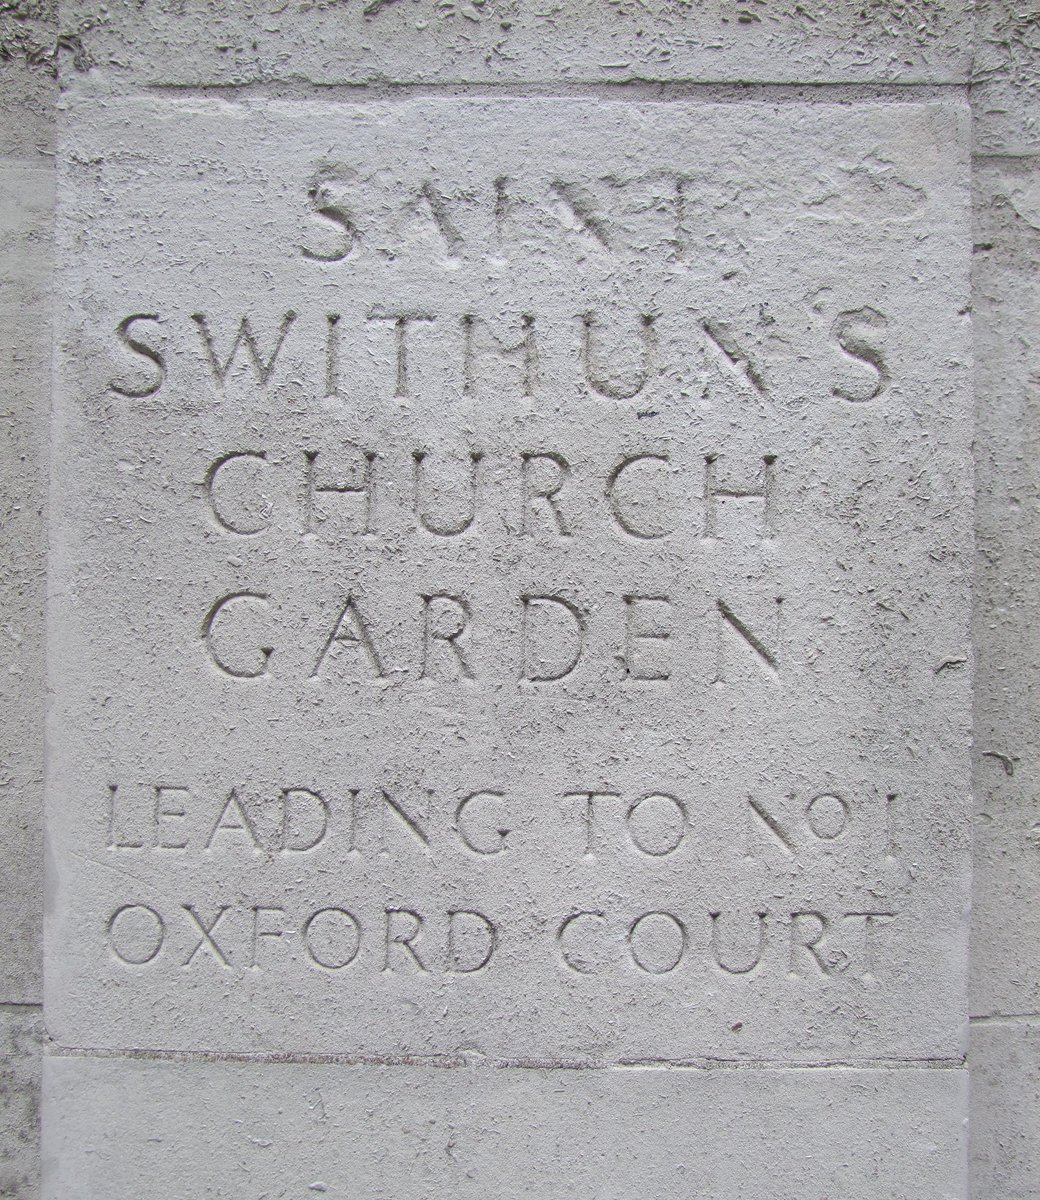 The 'London Stone' formerly set in the wall of the lost church can now be seen further along Cannon Street. The former burial ground survives as a garden in Salters Hall Court which ran up the side of the church.  http://www.simonknott.co.uk/citychurches/060/church.htm